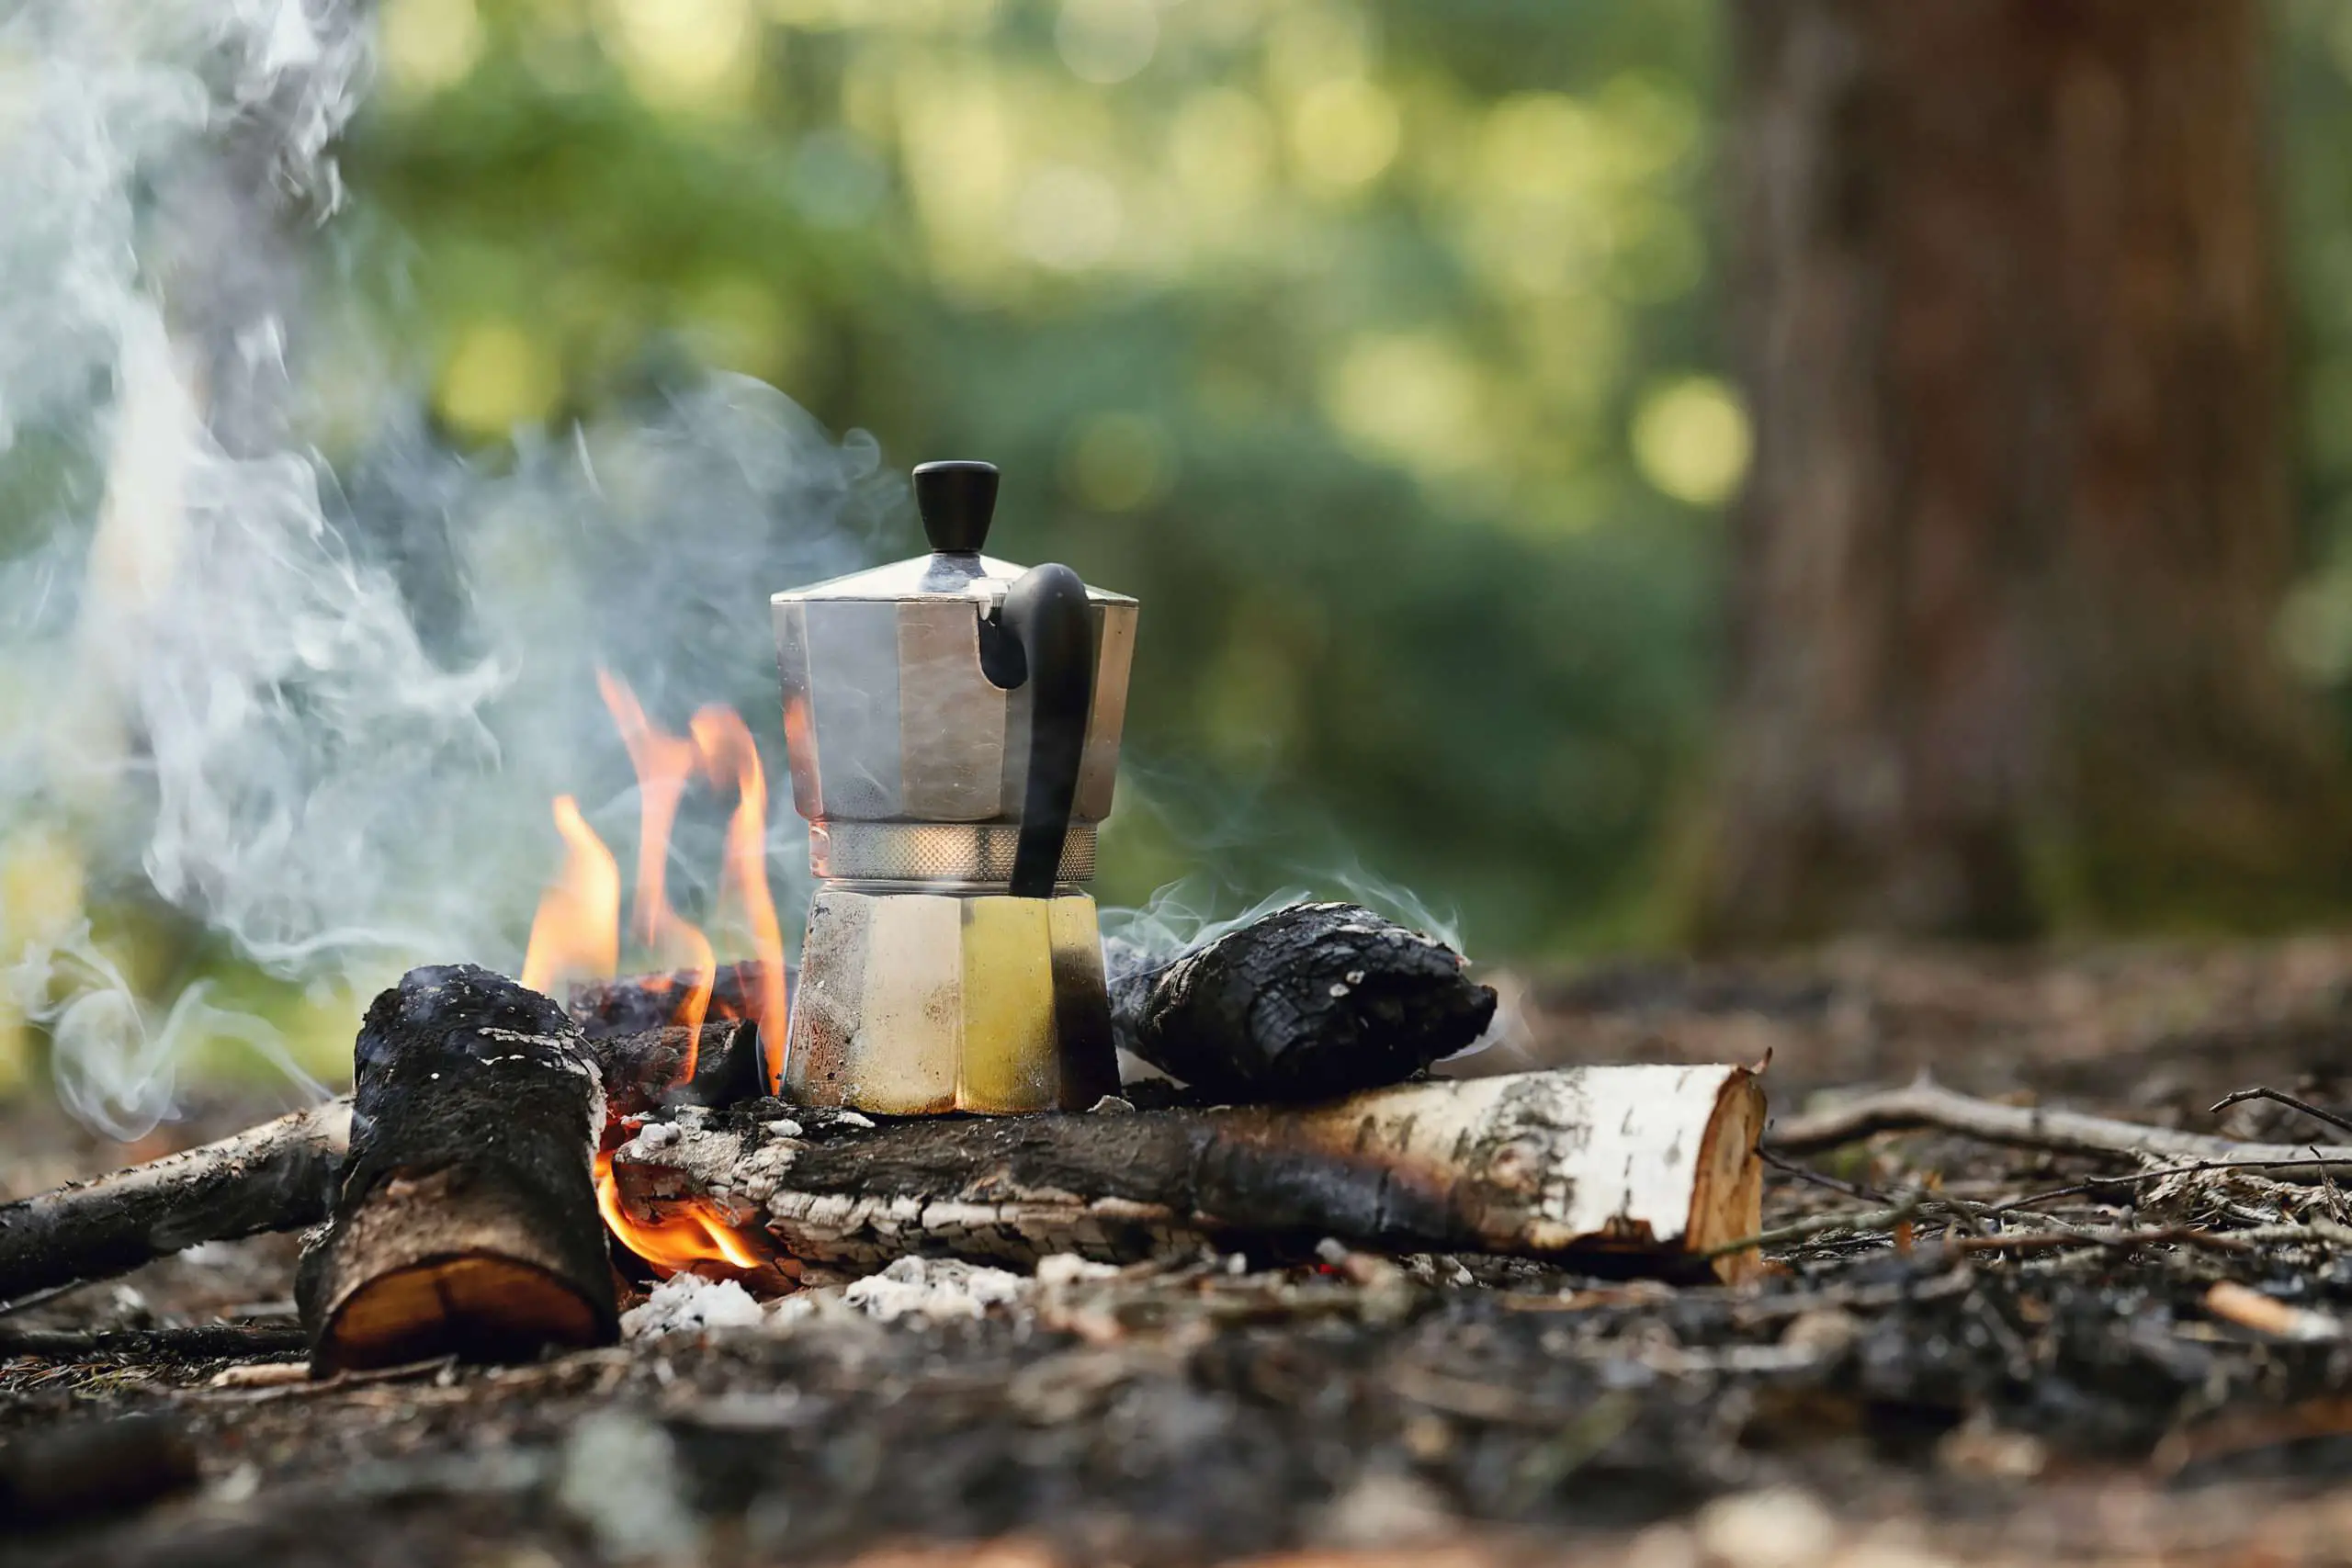 How to Use Percolator Coffee Pot for Camping